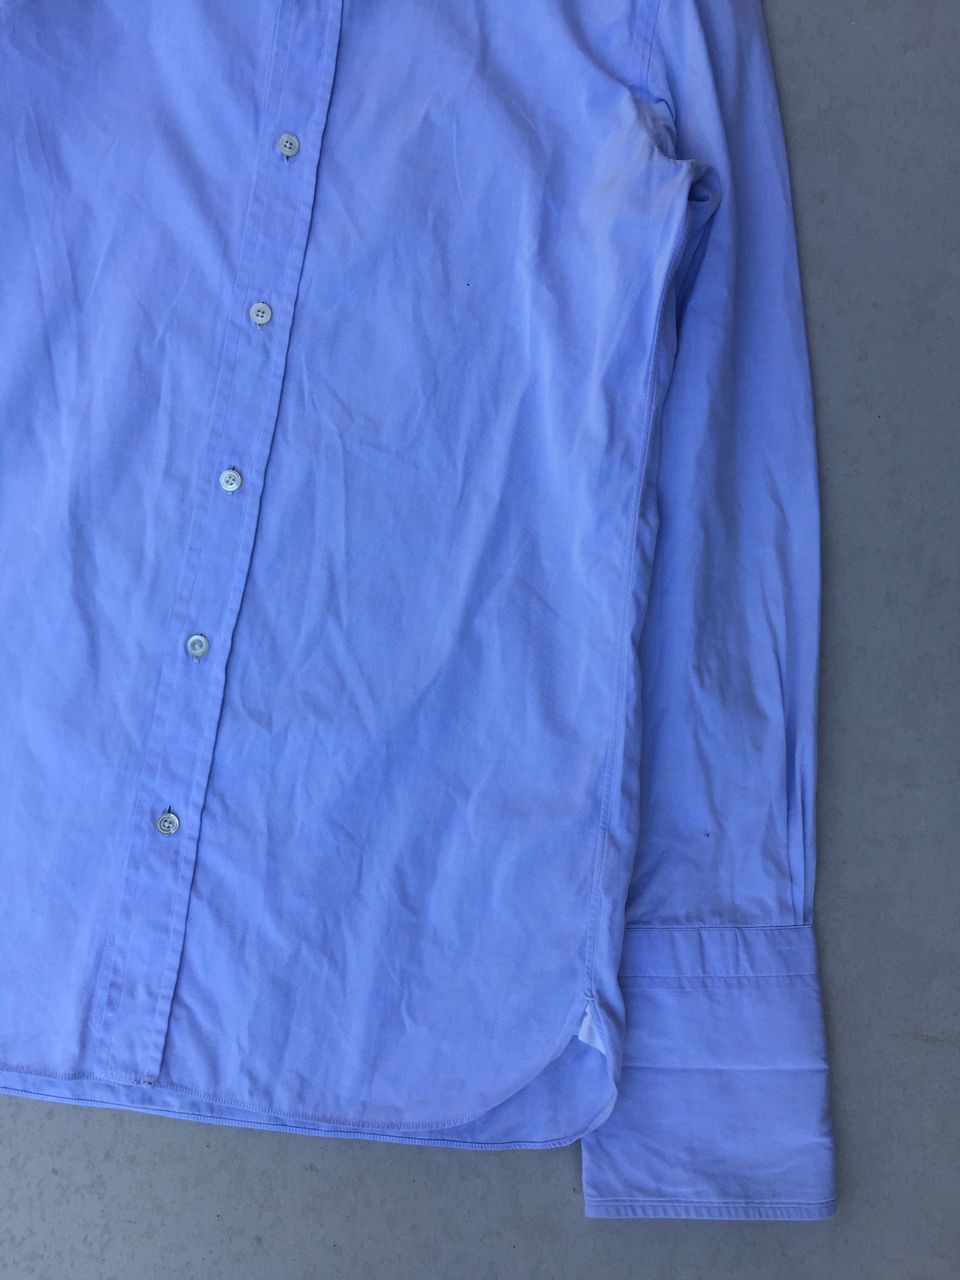 Tom Ford French Cuff button ups shirt - 3